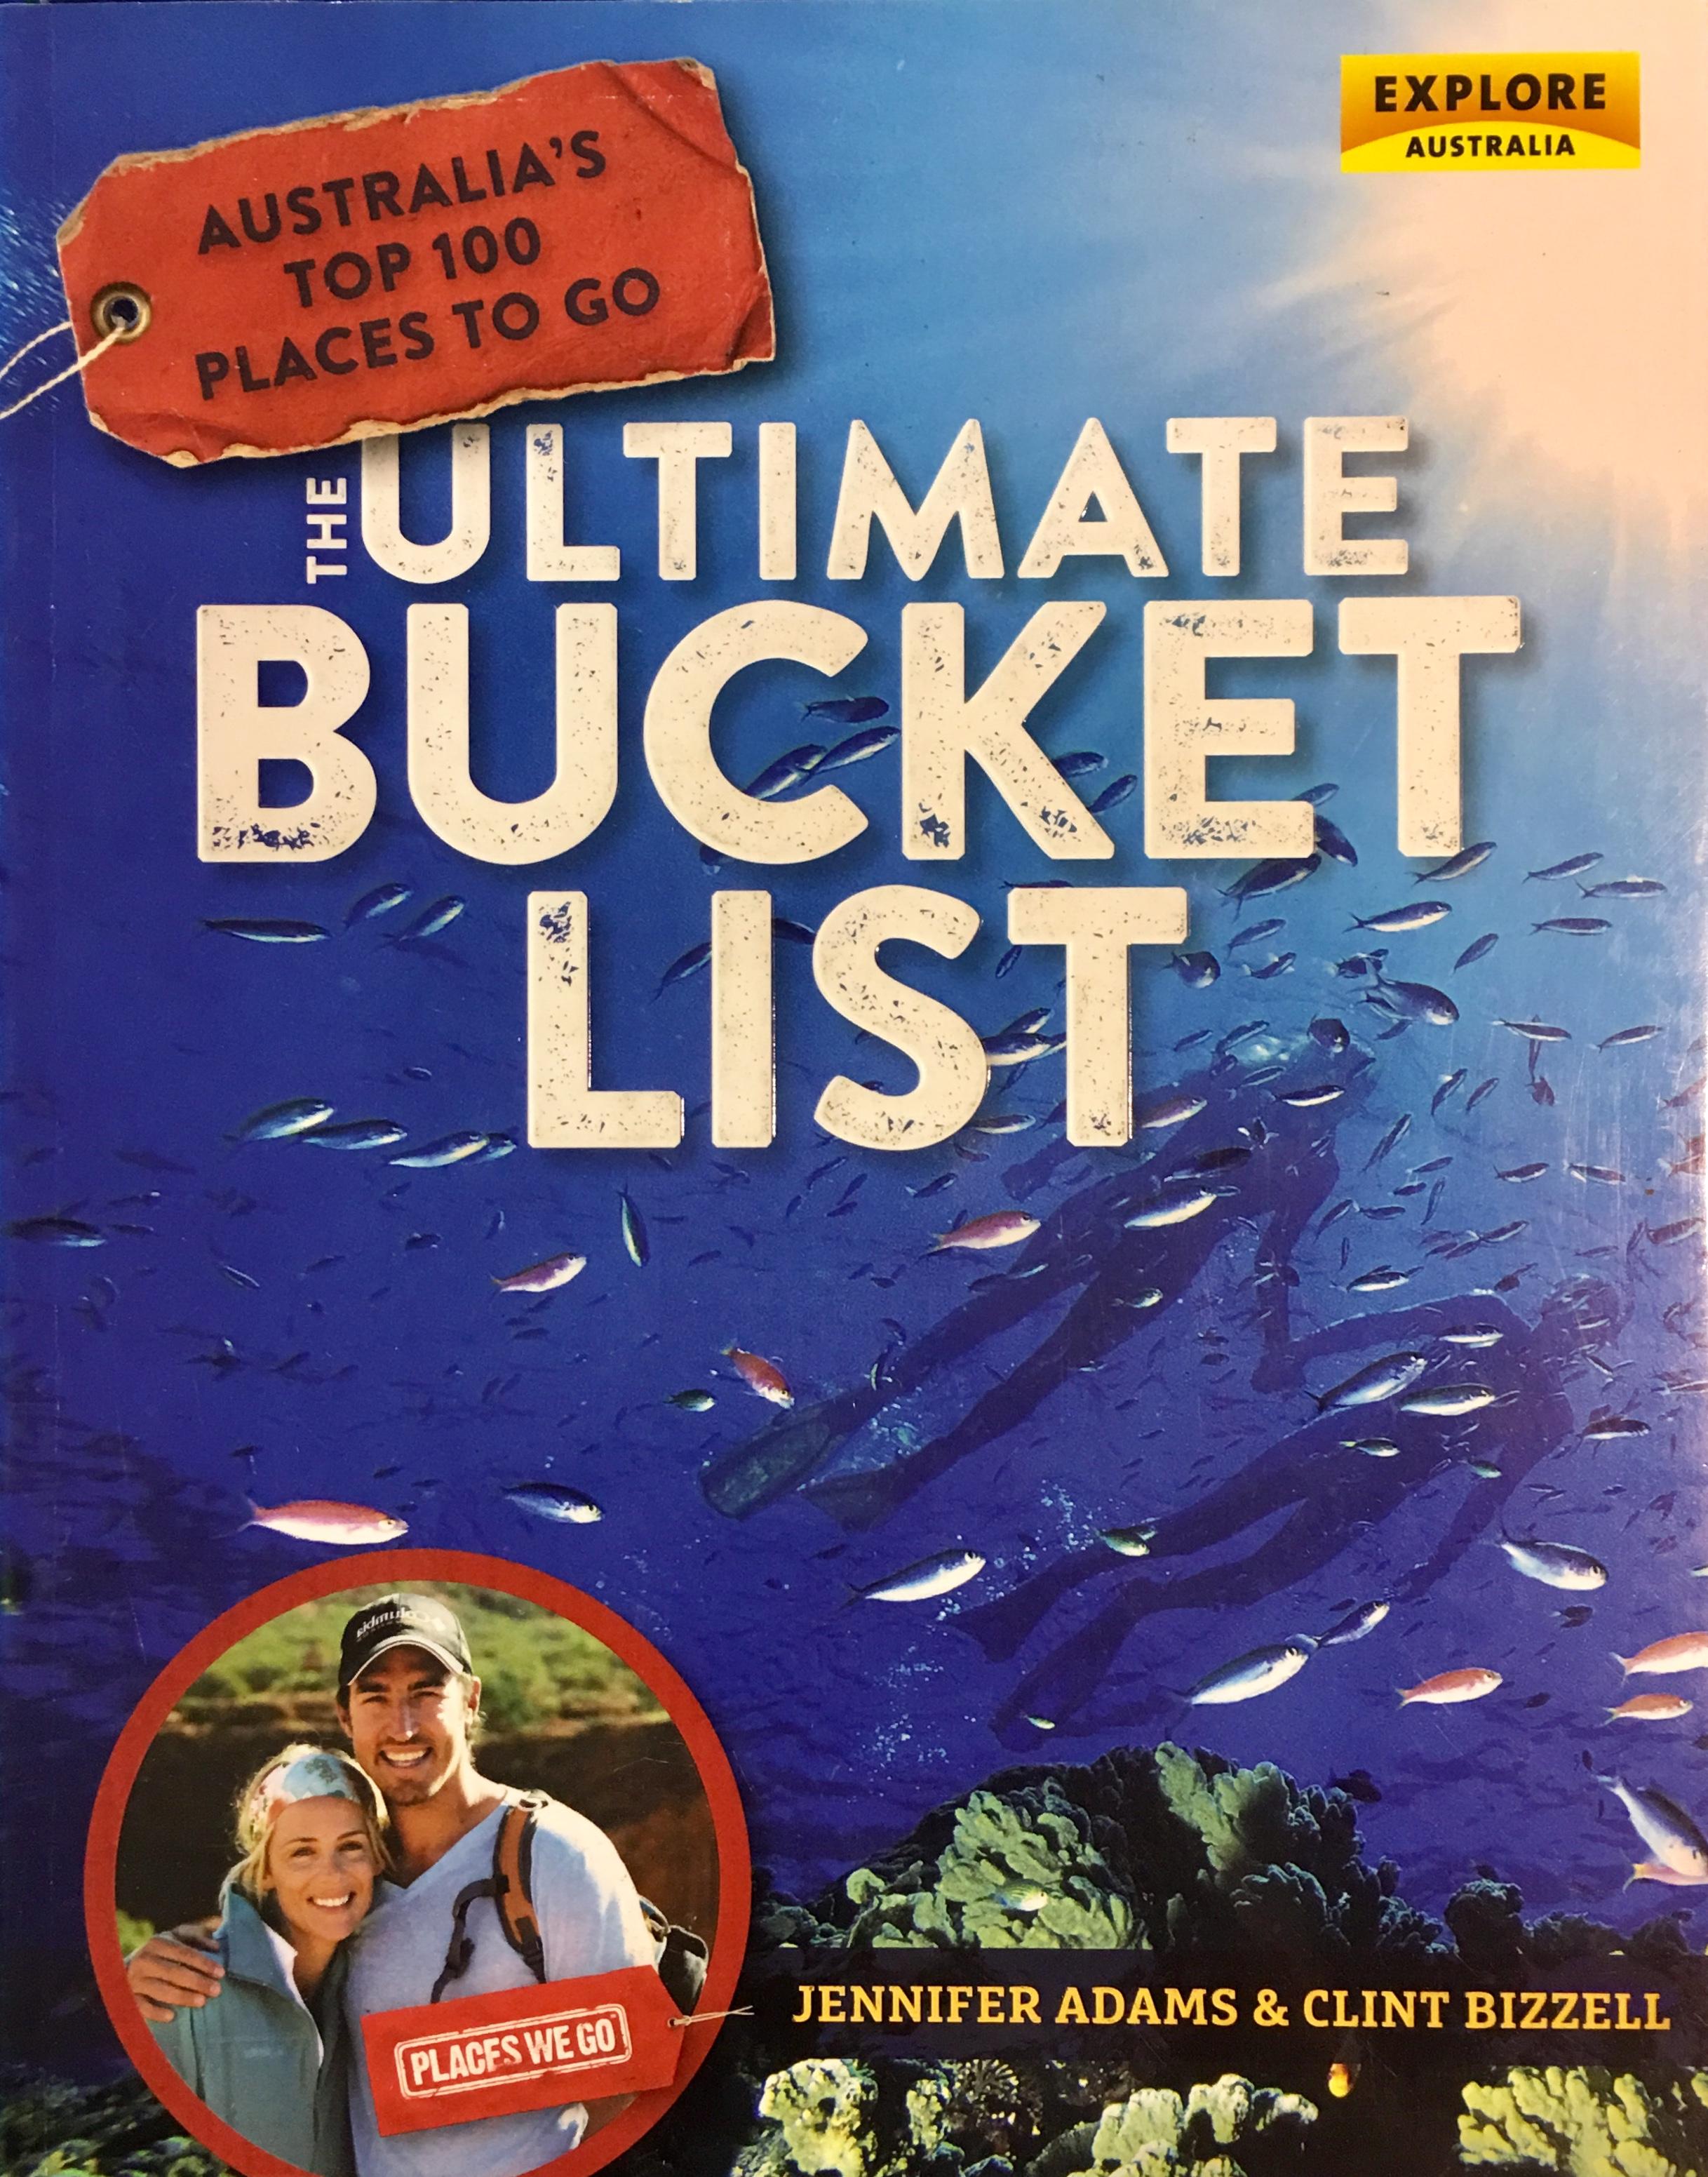 Australia's Top 100 Places to Go – The Ultimate Bucket List